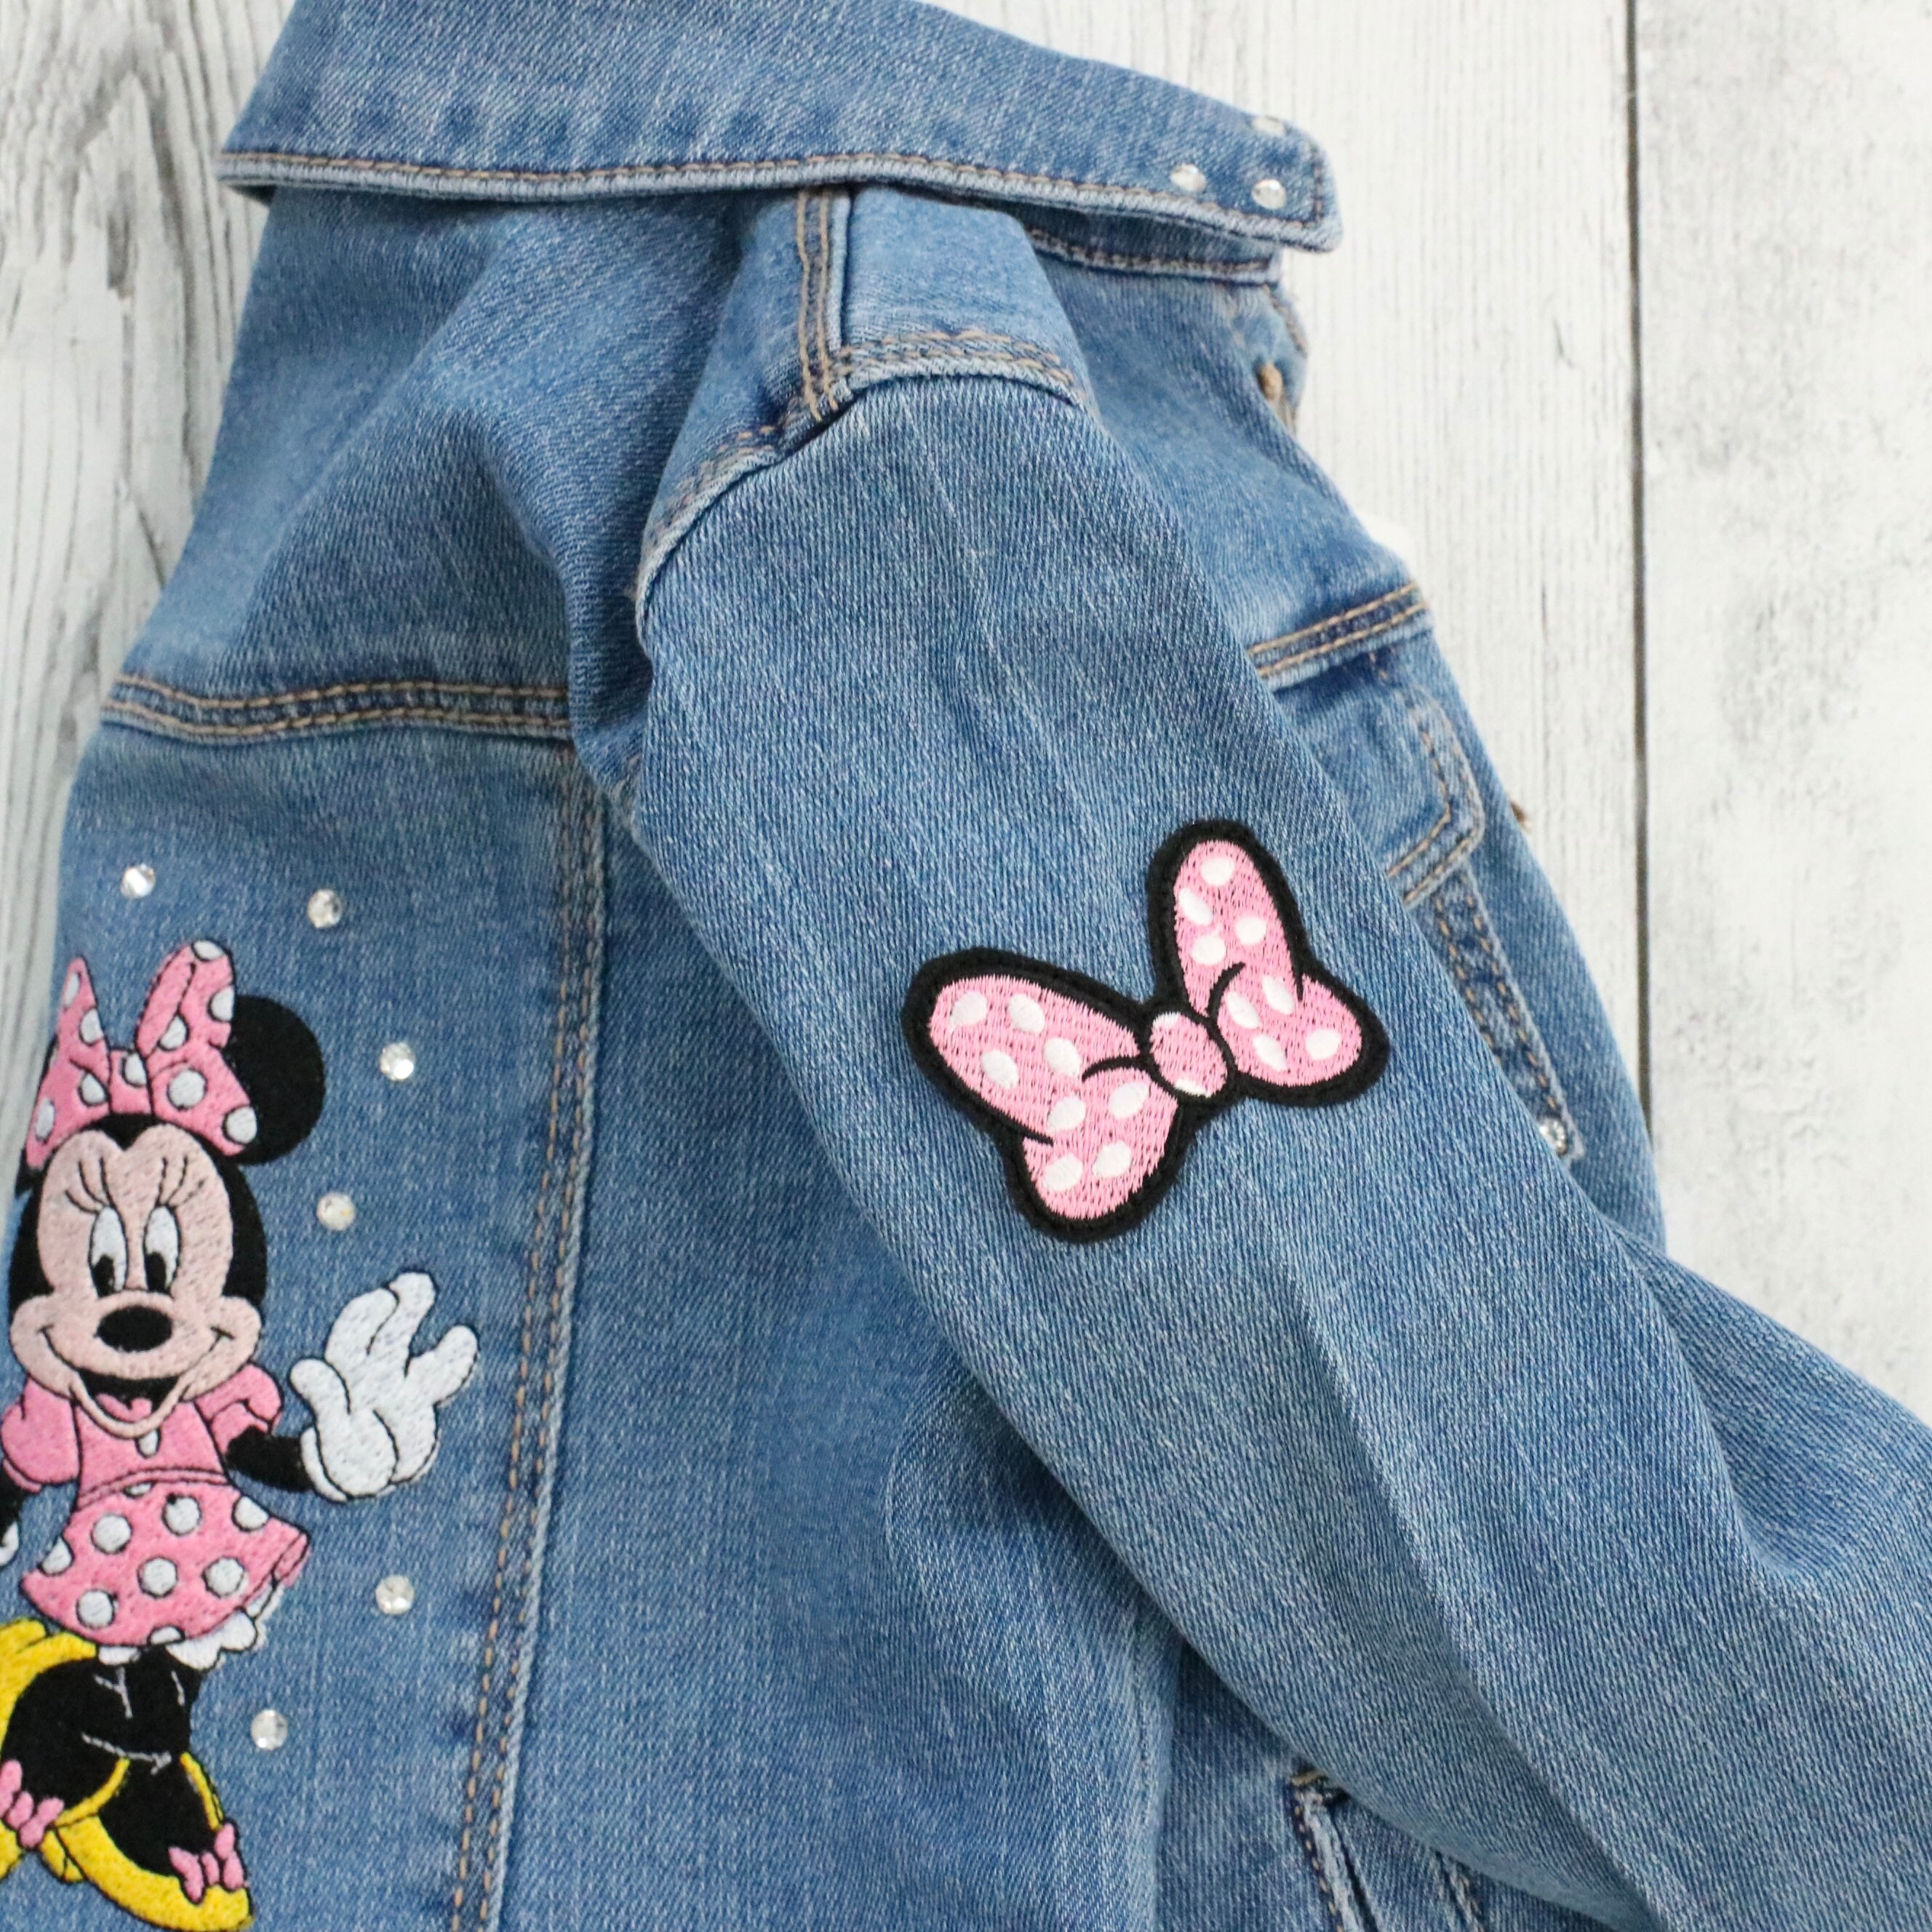 Wear All the Dots in This Minnie Jean Jacket 